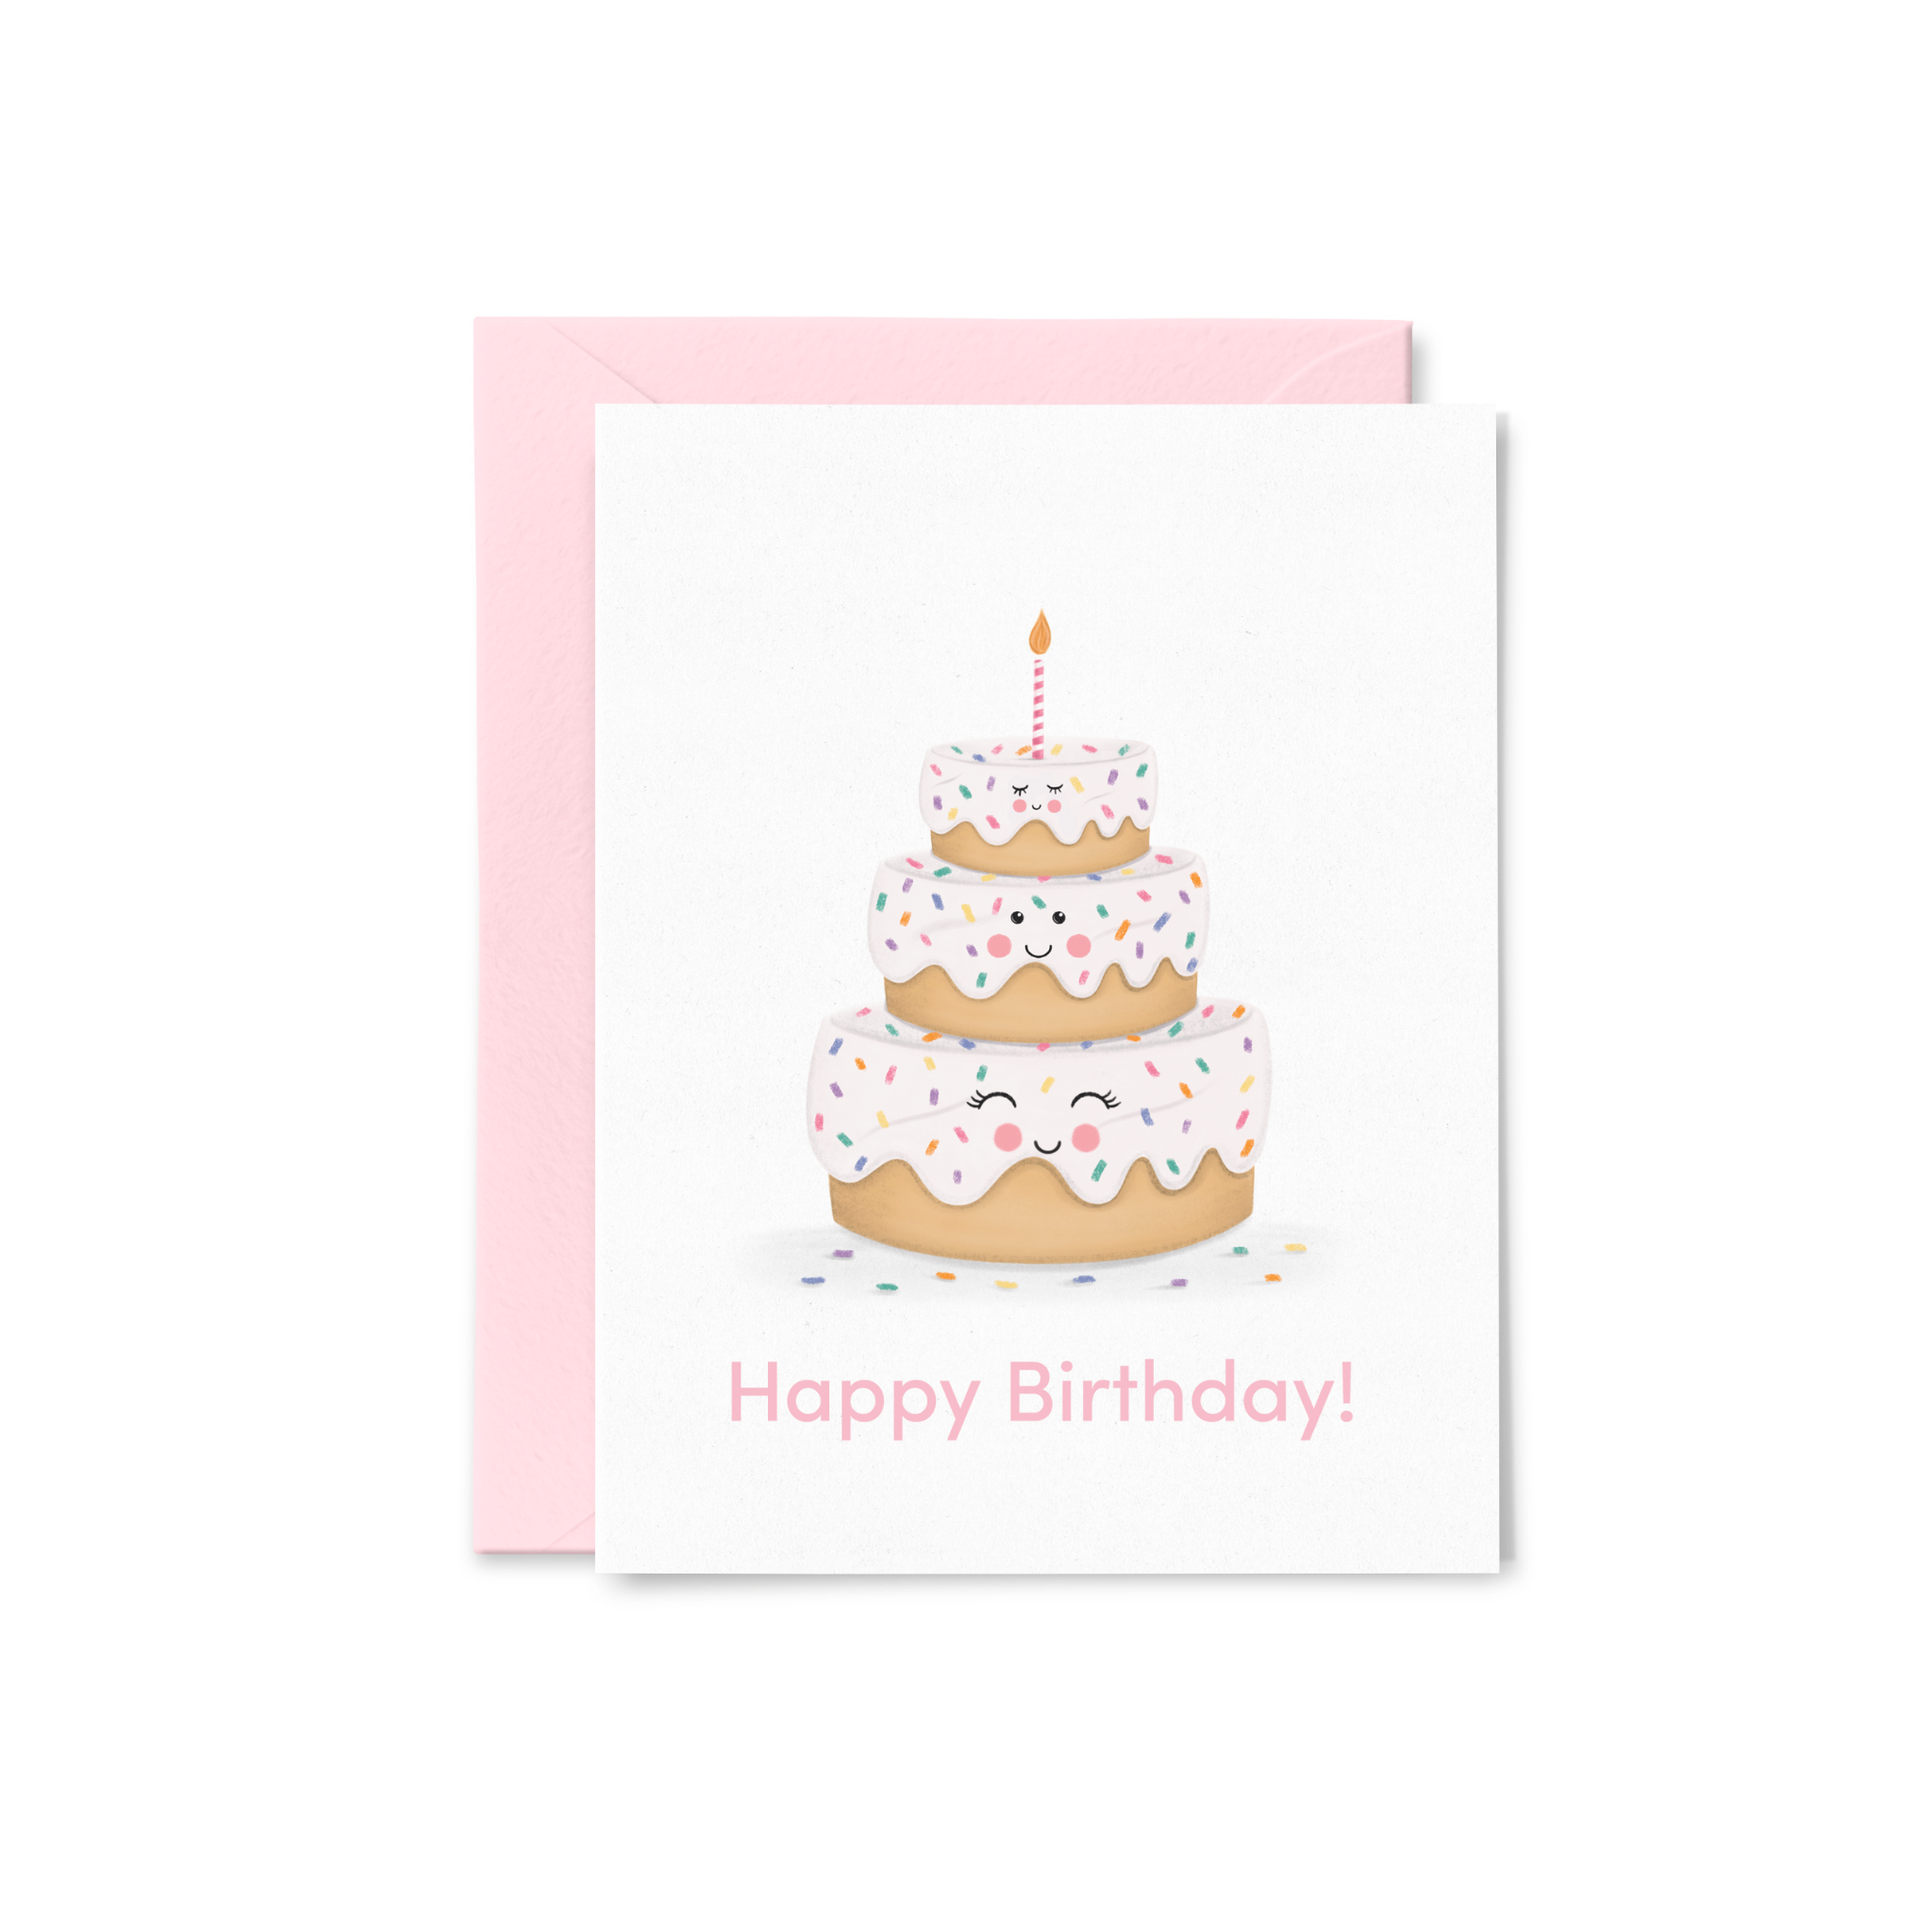 Office Birthday Wishes From All of Us Card, 1029482 | The Gallery Collection